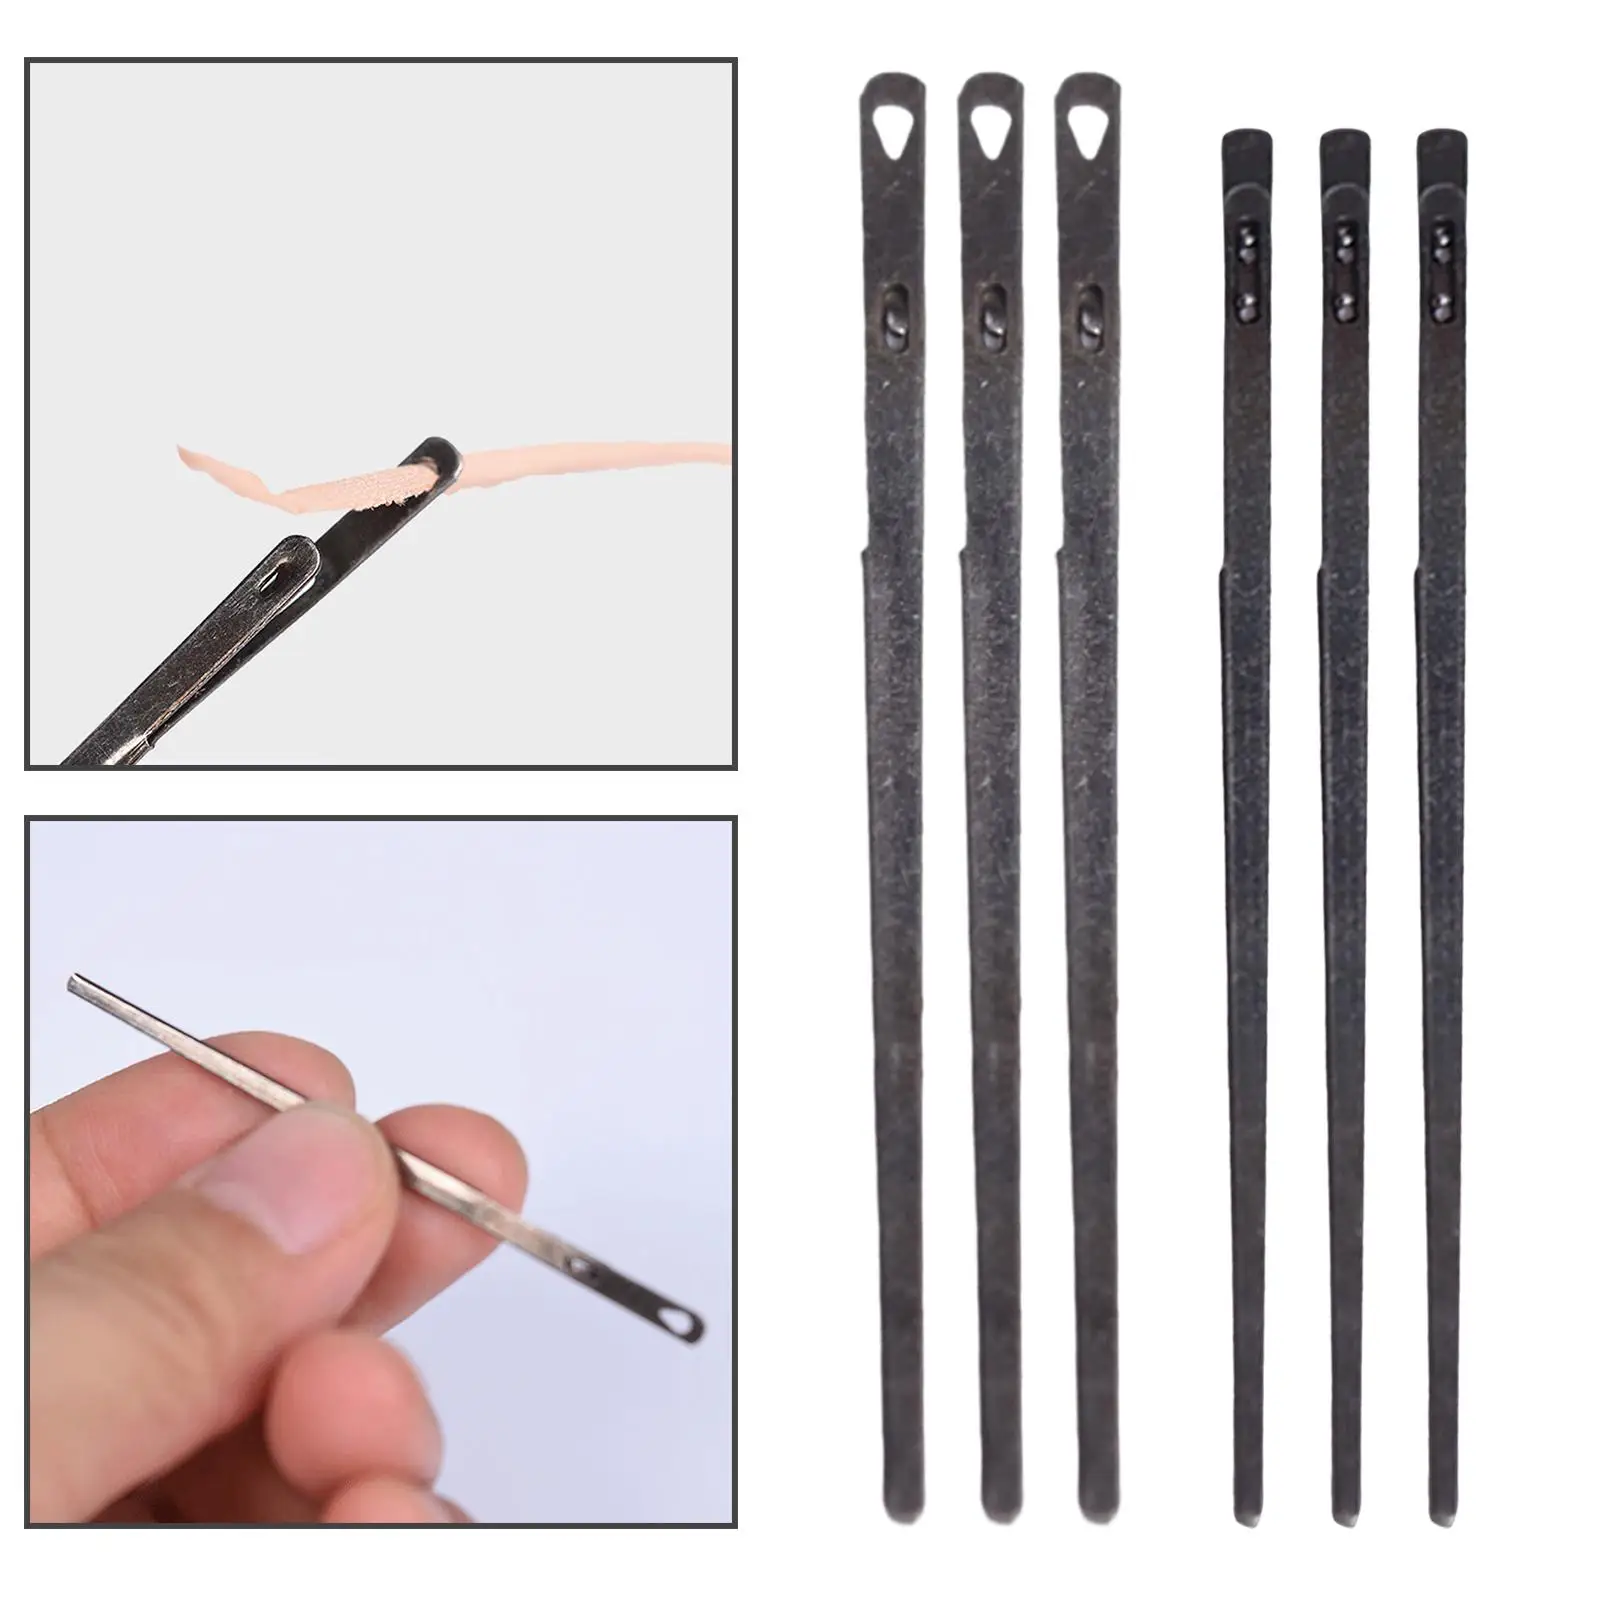 3Pcs Leather Lacing Needle Steel Leathercraft High Quality Handmade Repair for Fabric Painting Creative Gifts Needle Arts Crafts